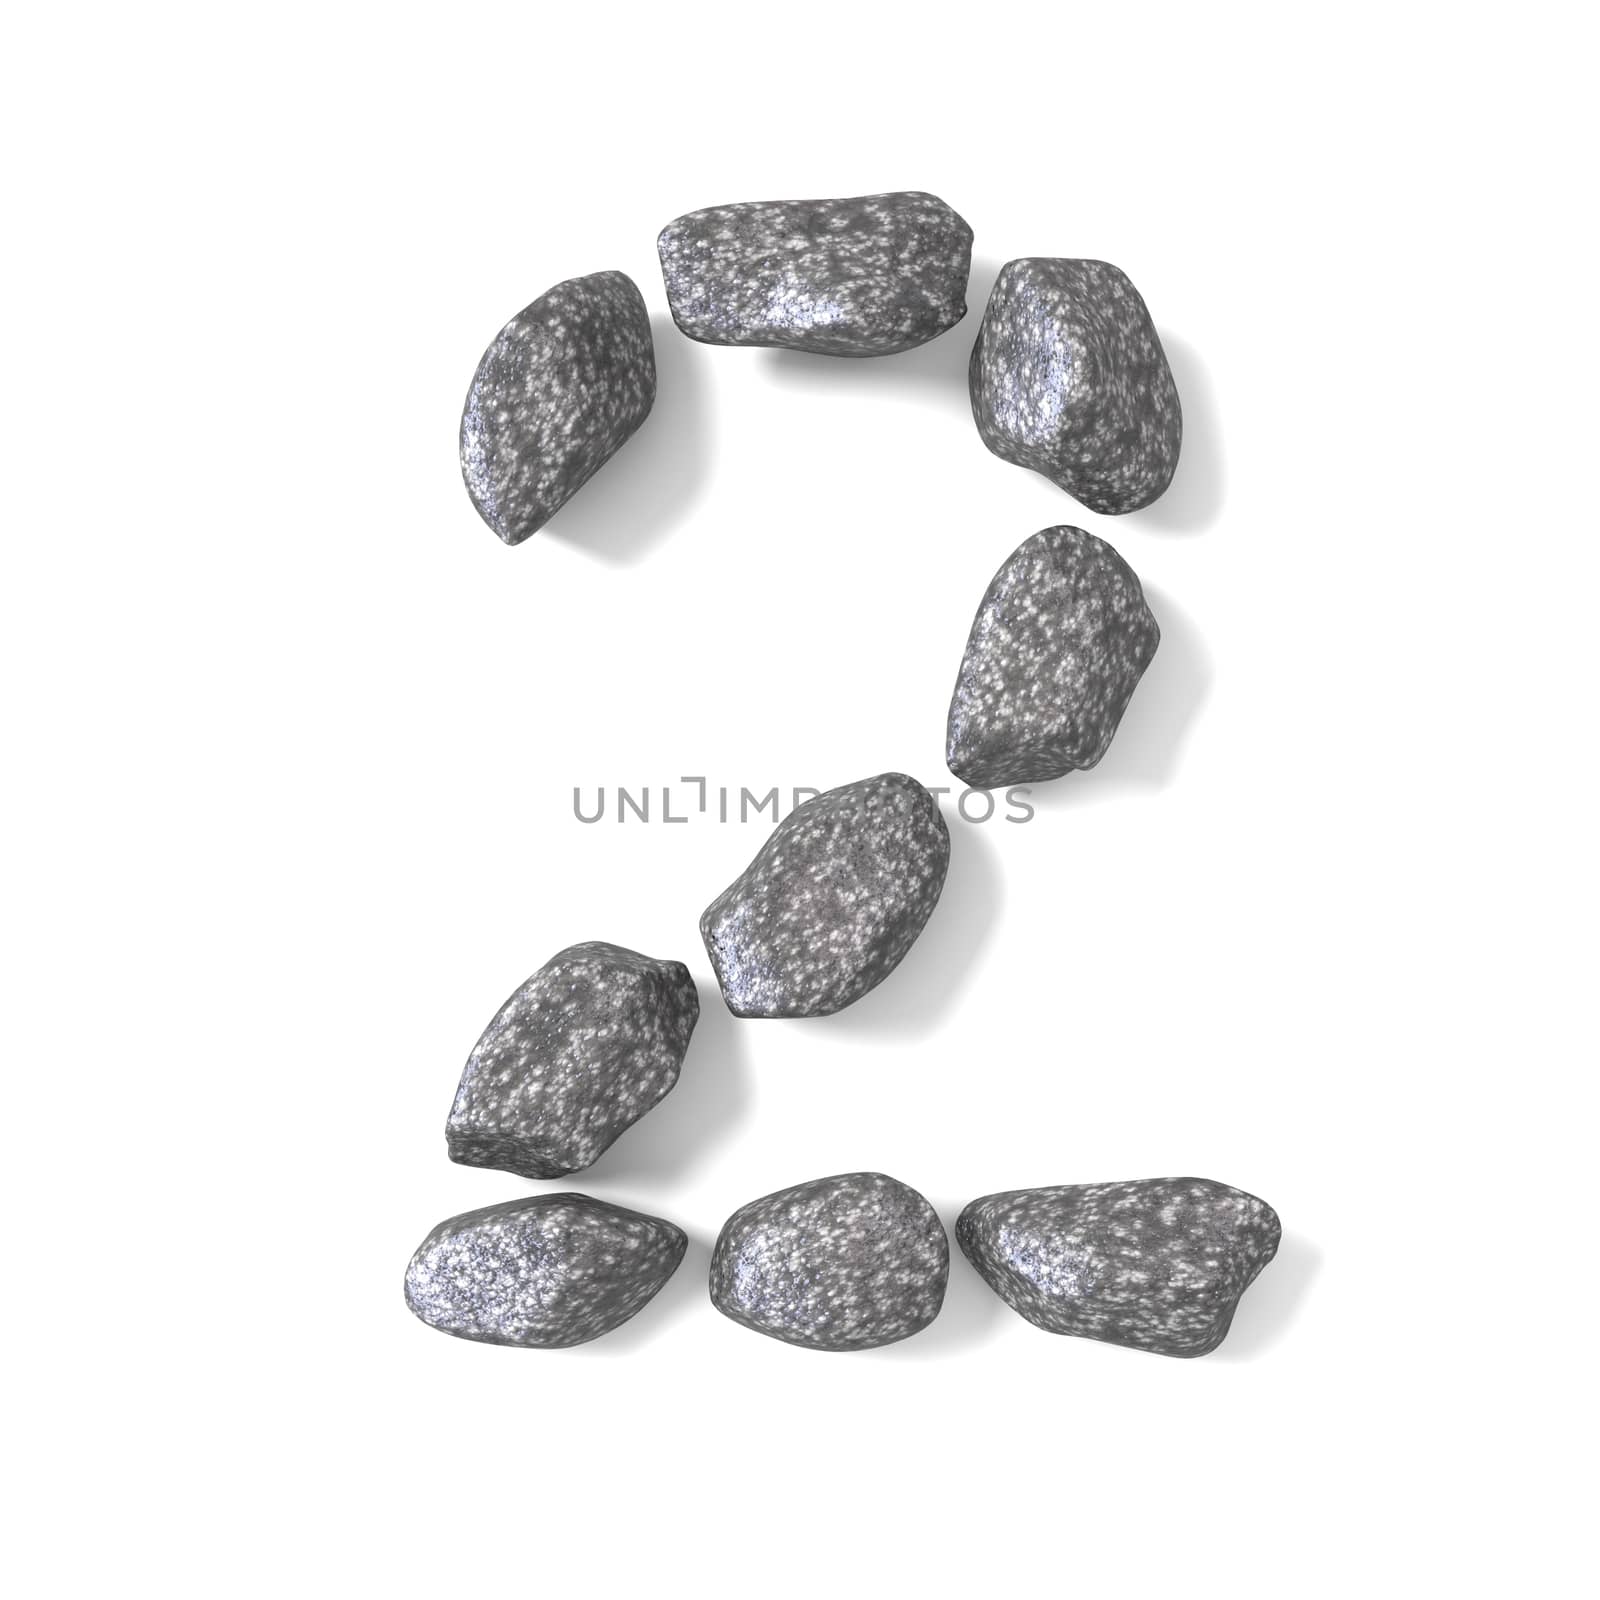 Font made of rocks NUMBER two 2 3D render illustration isolated on white background